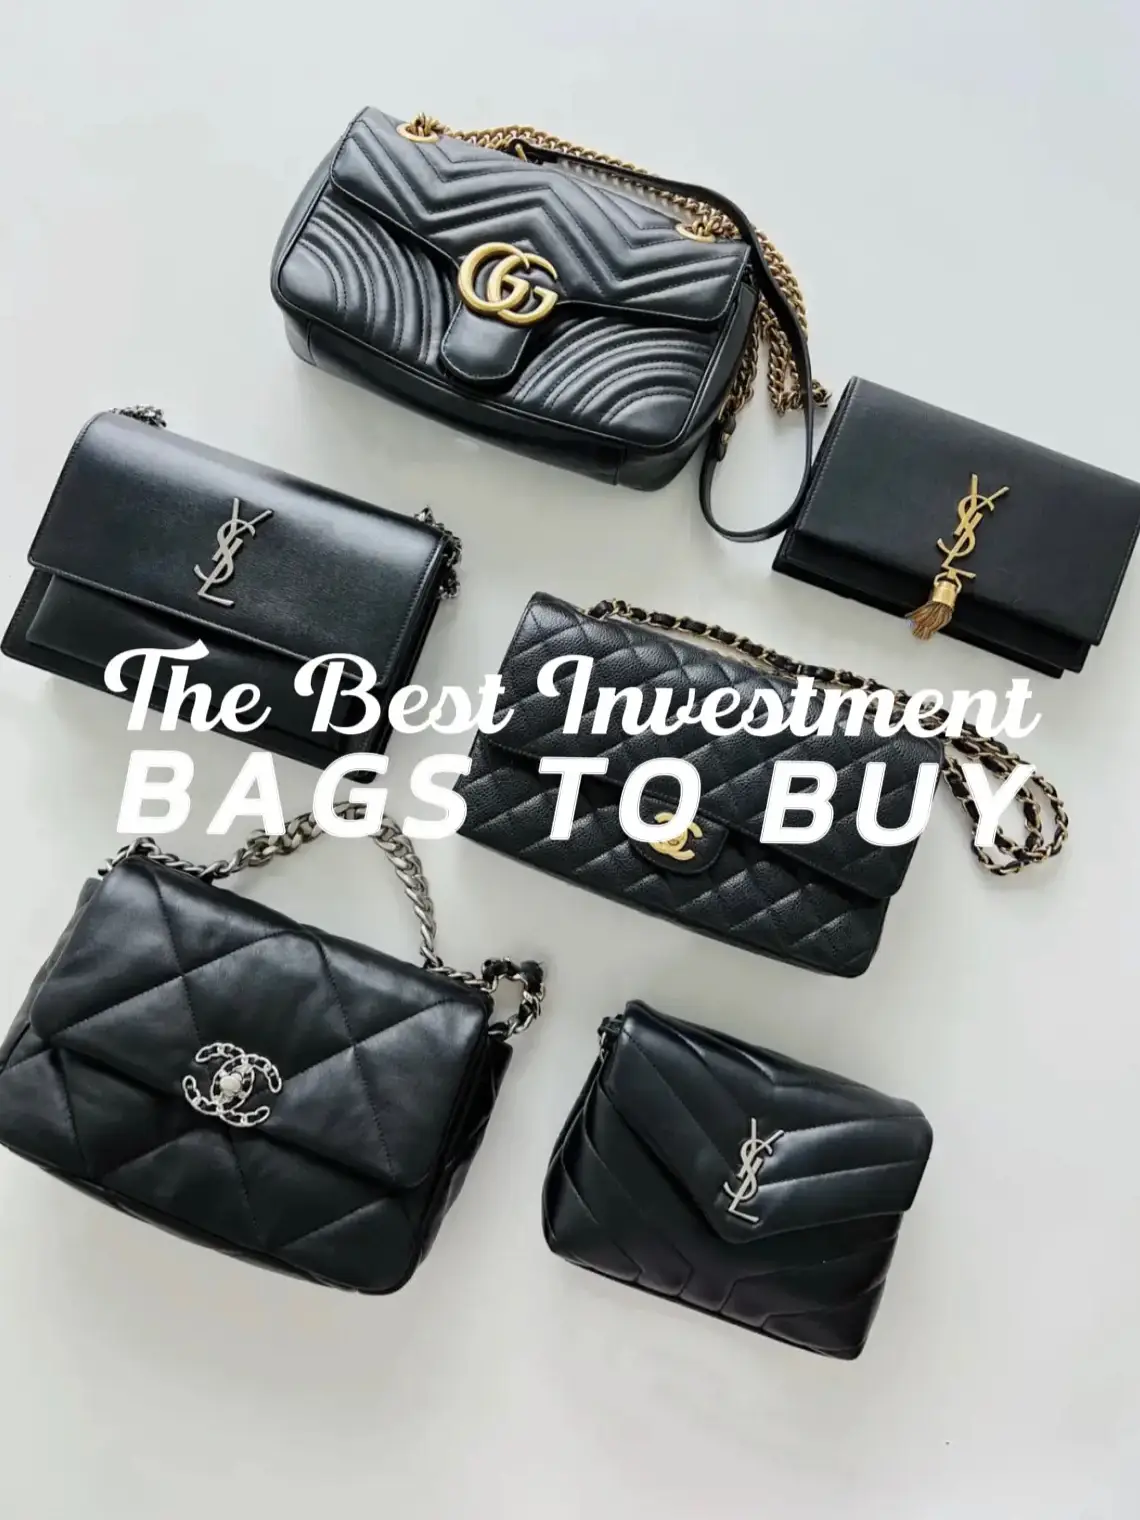 THE BEST INVESTMENT BAGS TO BUY, Gallery posted by Jane Allyssa